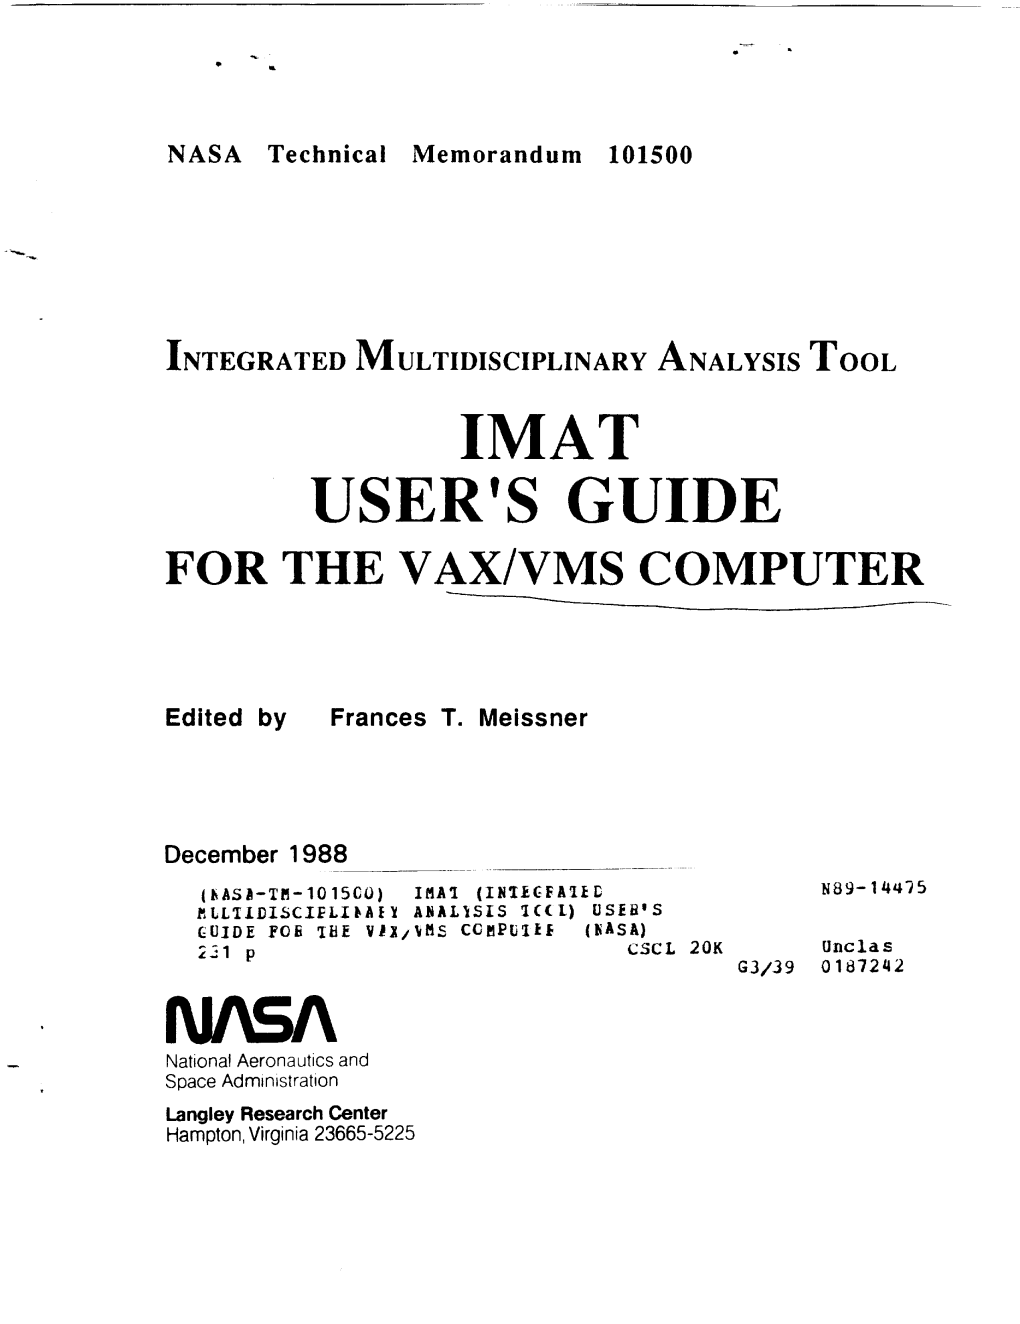 Imat User's Guide for the Vax/Vms Computer